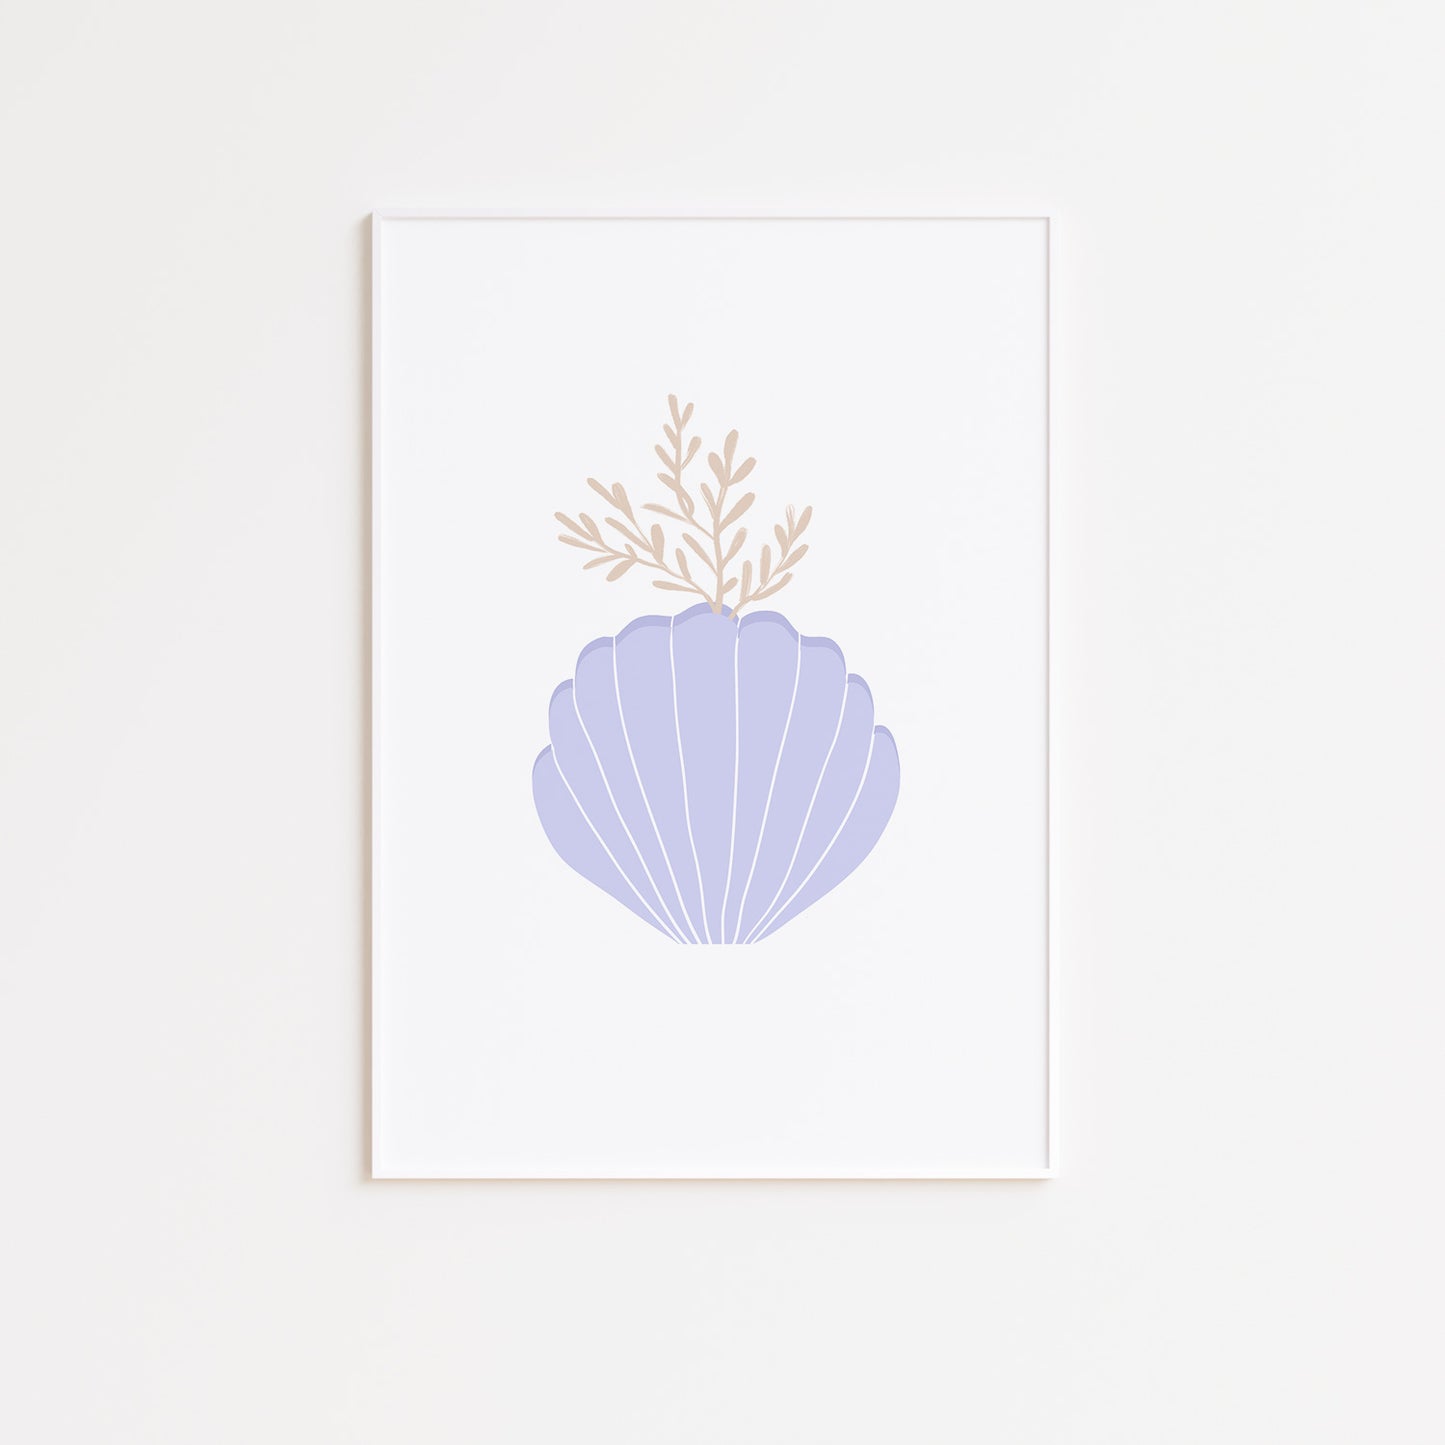 Beige and Lilac Clam Shell Wall Poster Print